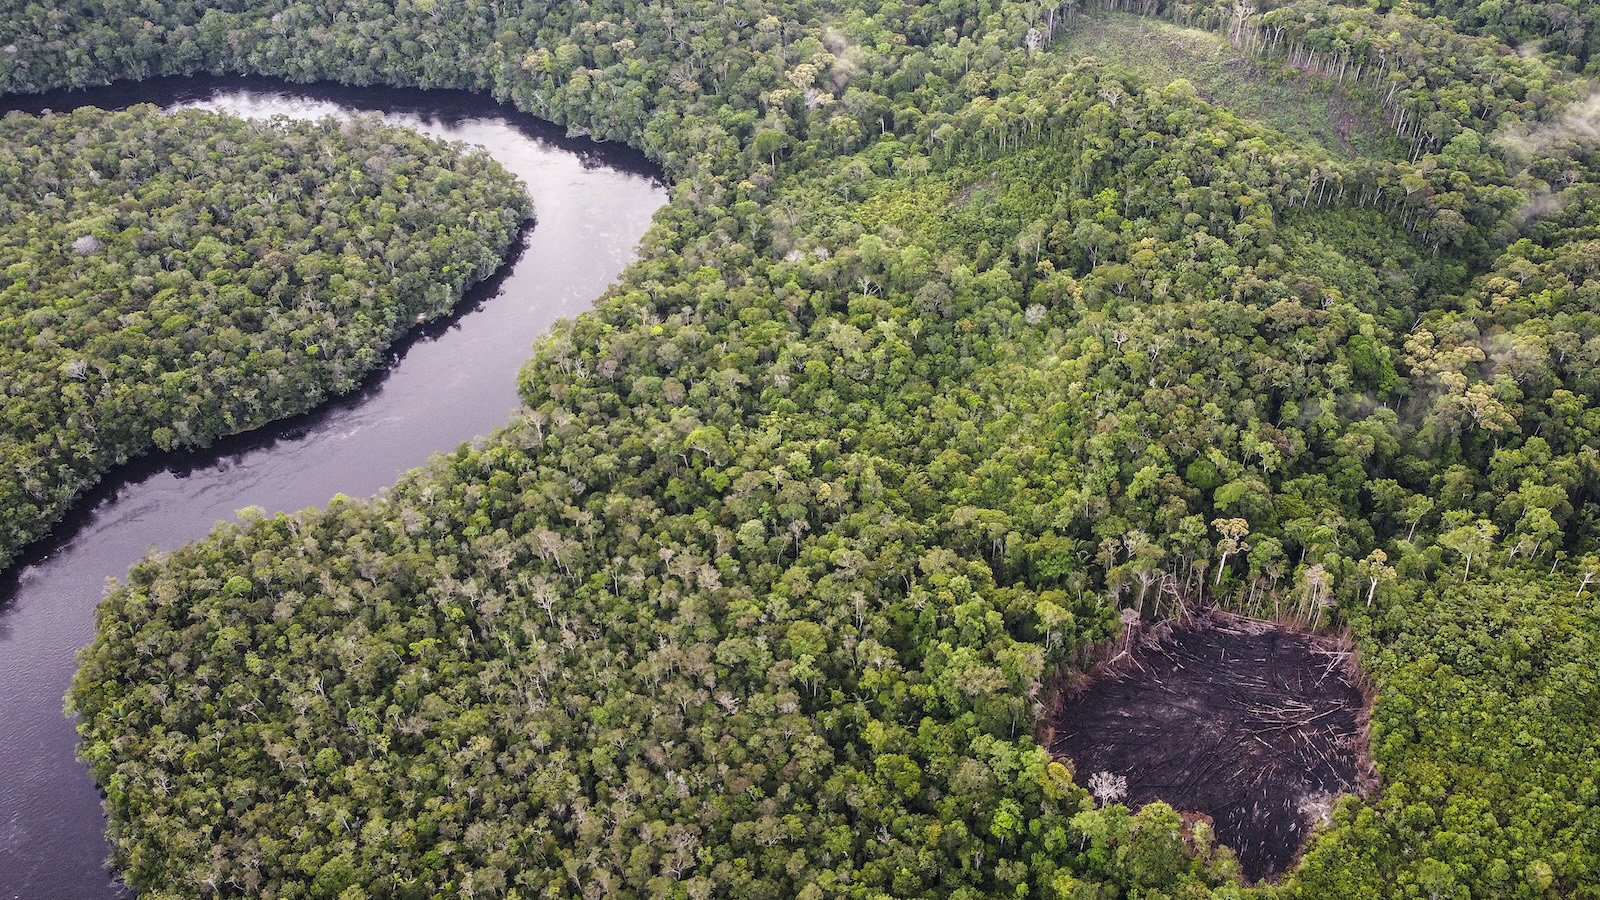 Aerial view of a rainforest with a river running through it. A small patch on the right is deforested.